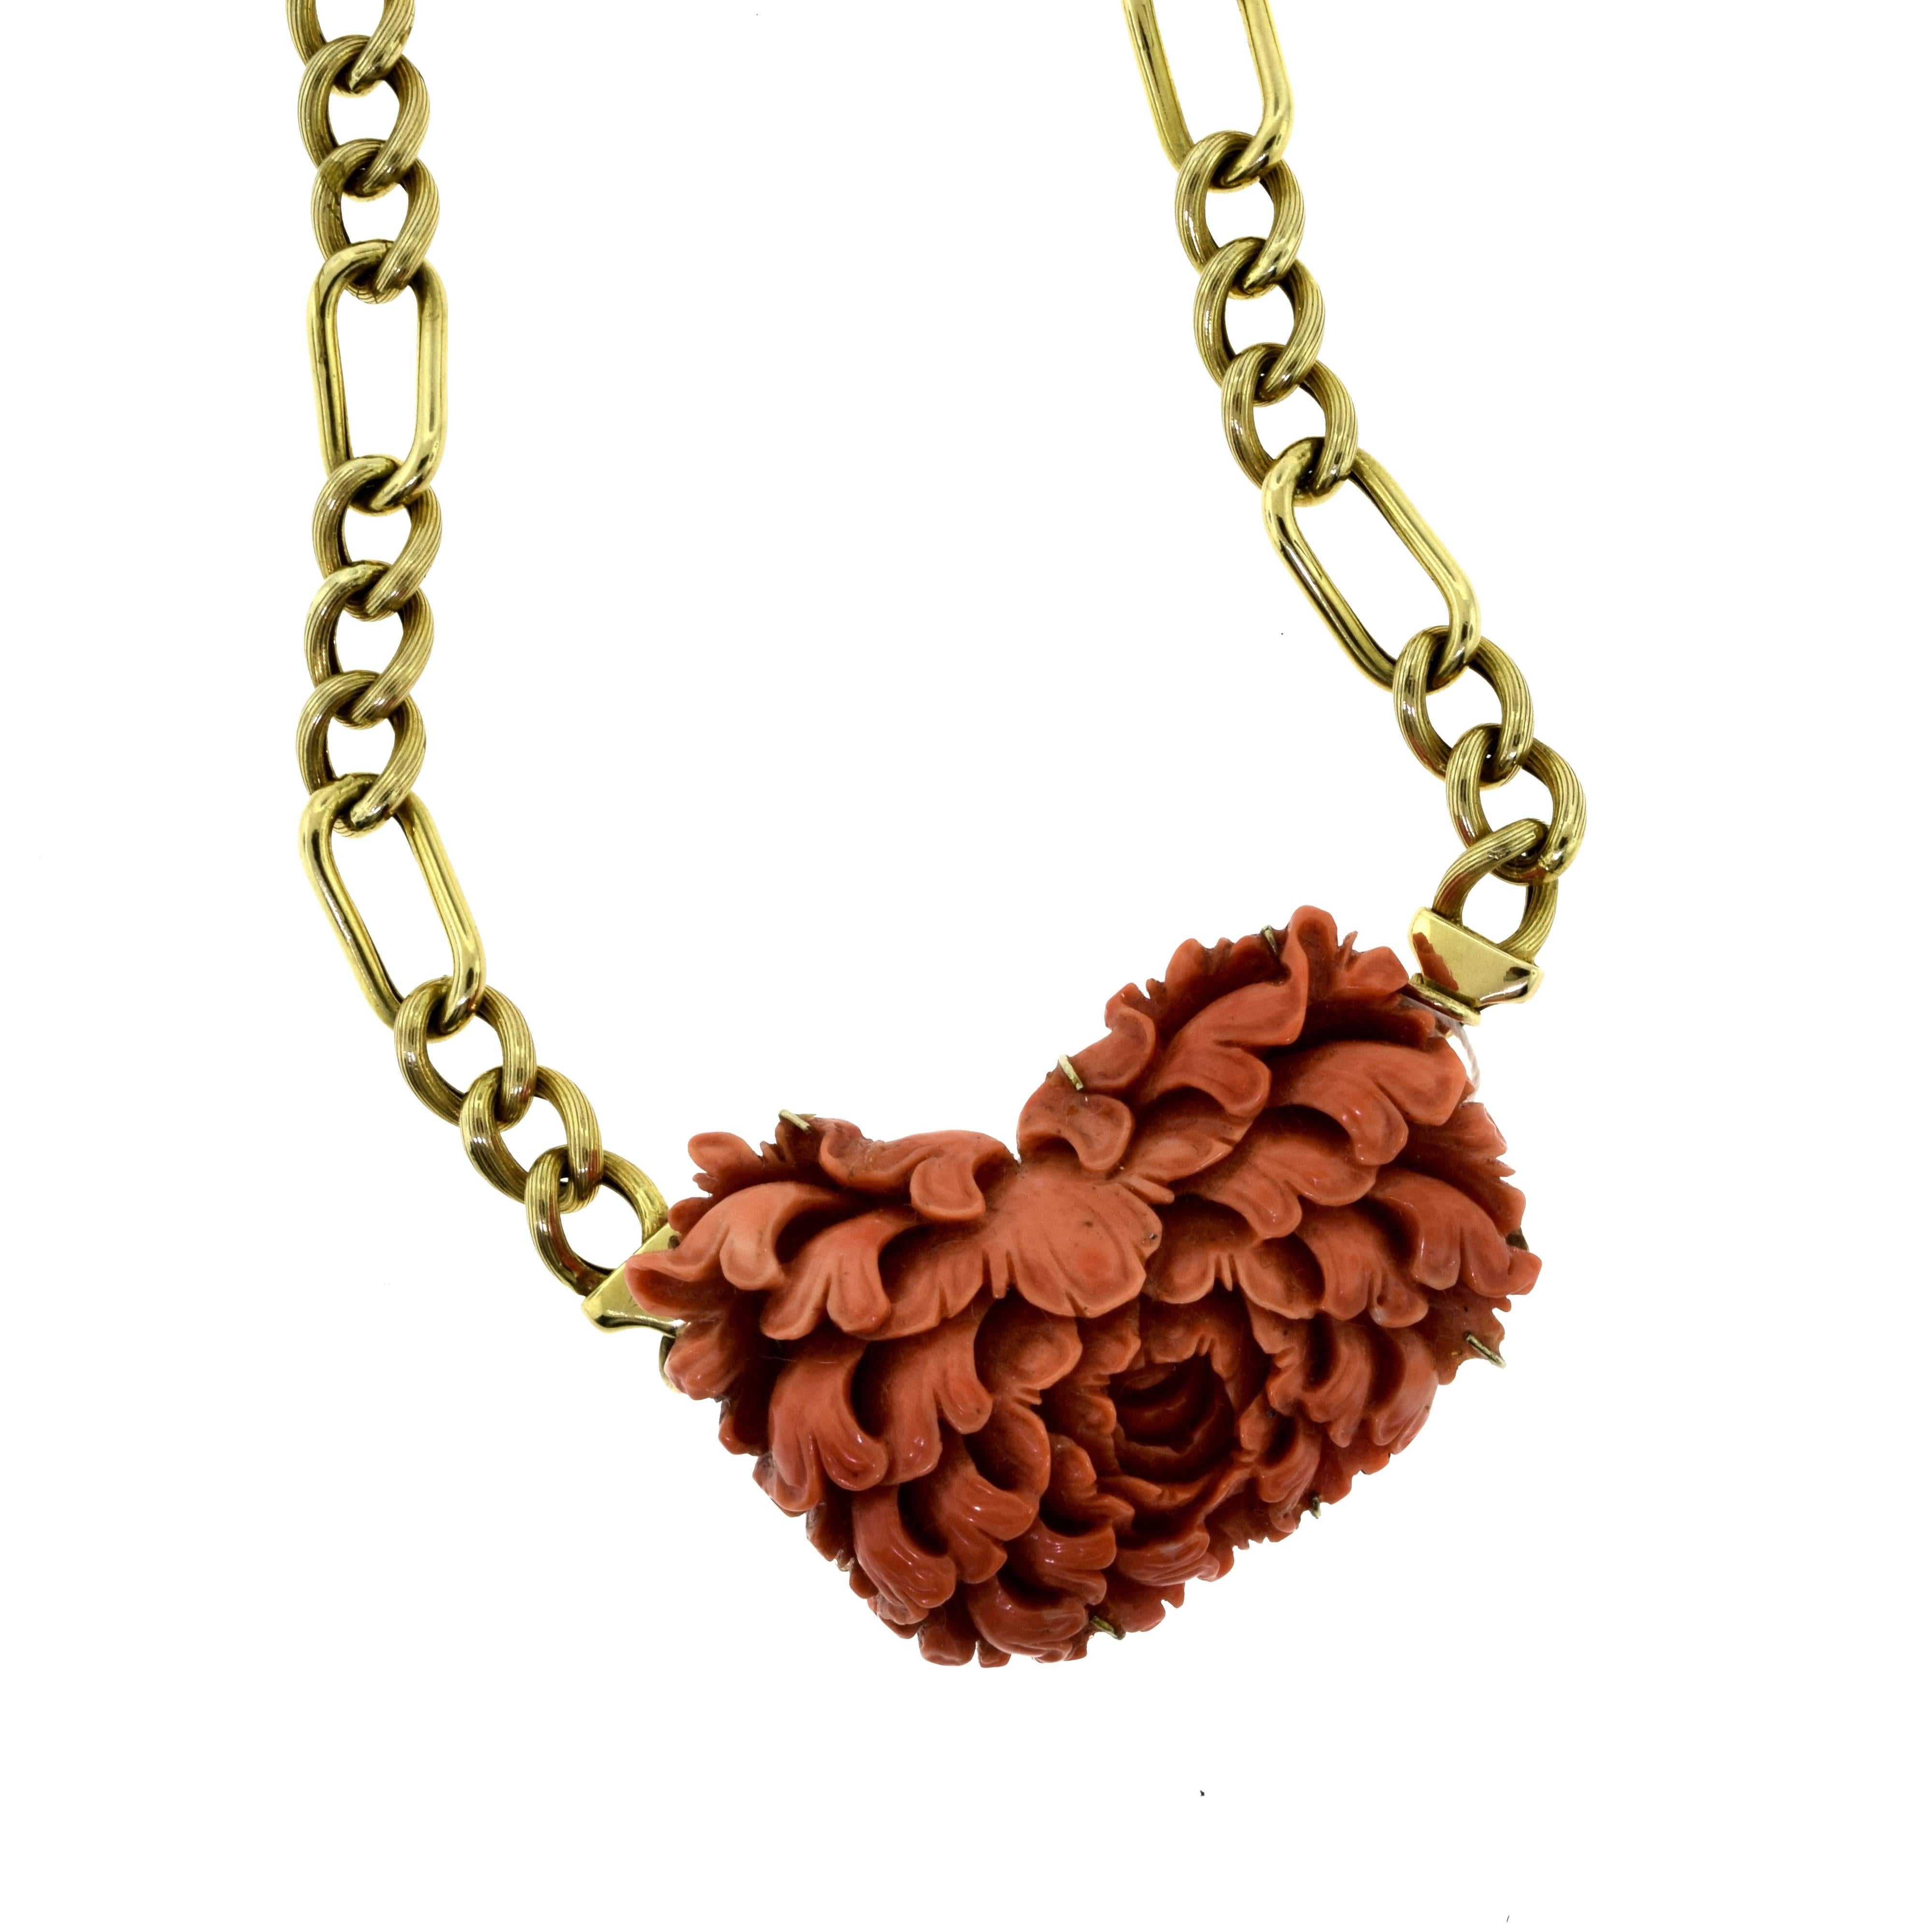 Stone: Natural Red Coral 
Coral Dimensions: 1.75 x 1.5 inches
Coral Thickness: approx. 10.11 mm
Metal (chain): 14 Karat Yellow Gold
Chain Type: Figaro Chain
Total Item Weight (g): 45.7

A gorgeous textured natural red coral flower pendant on a 14 k